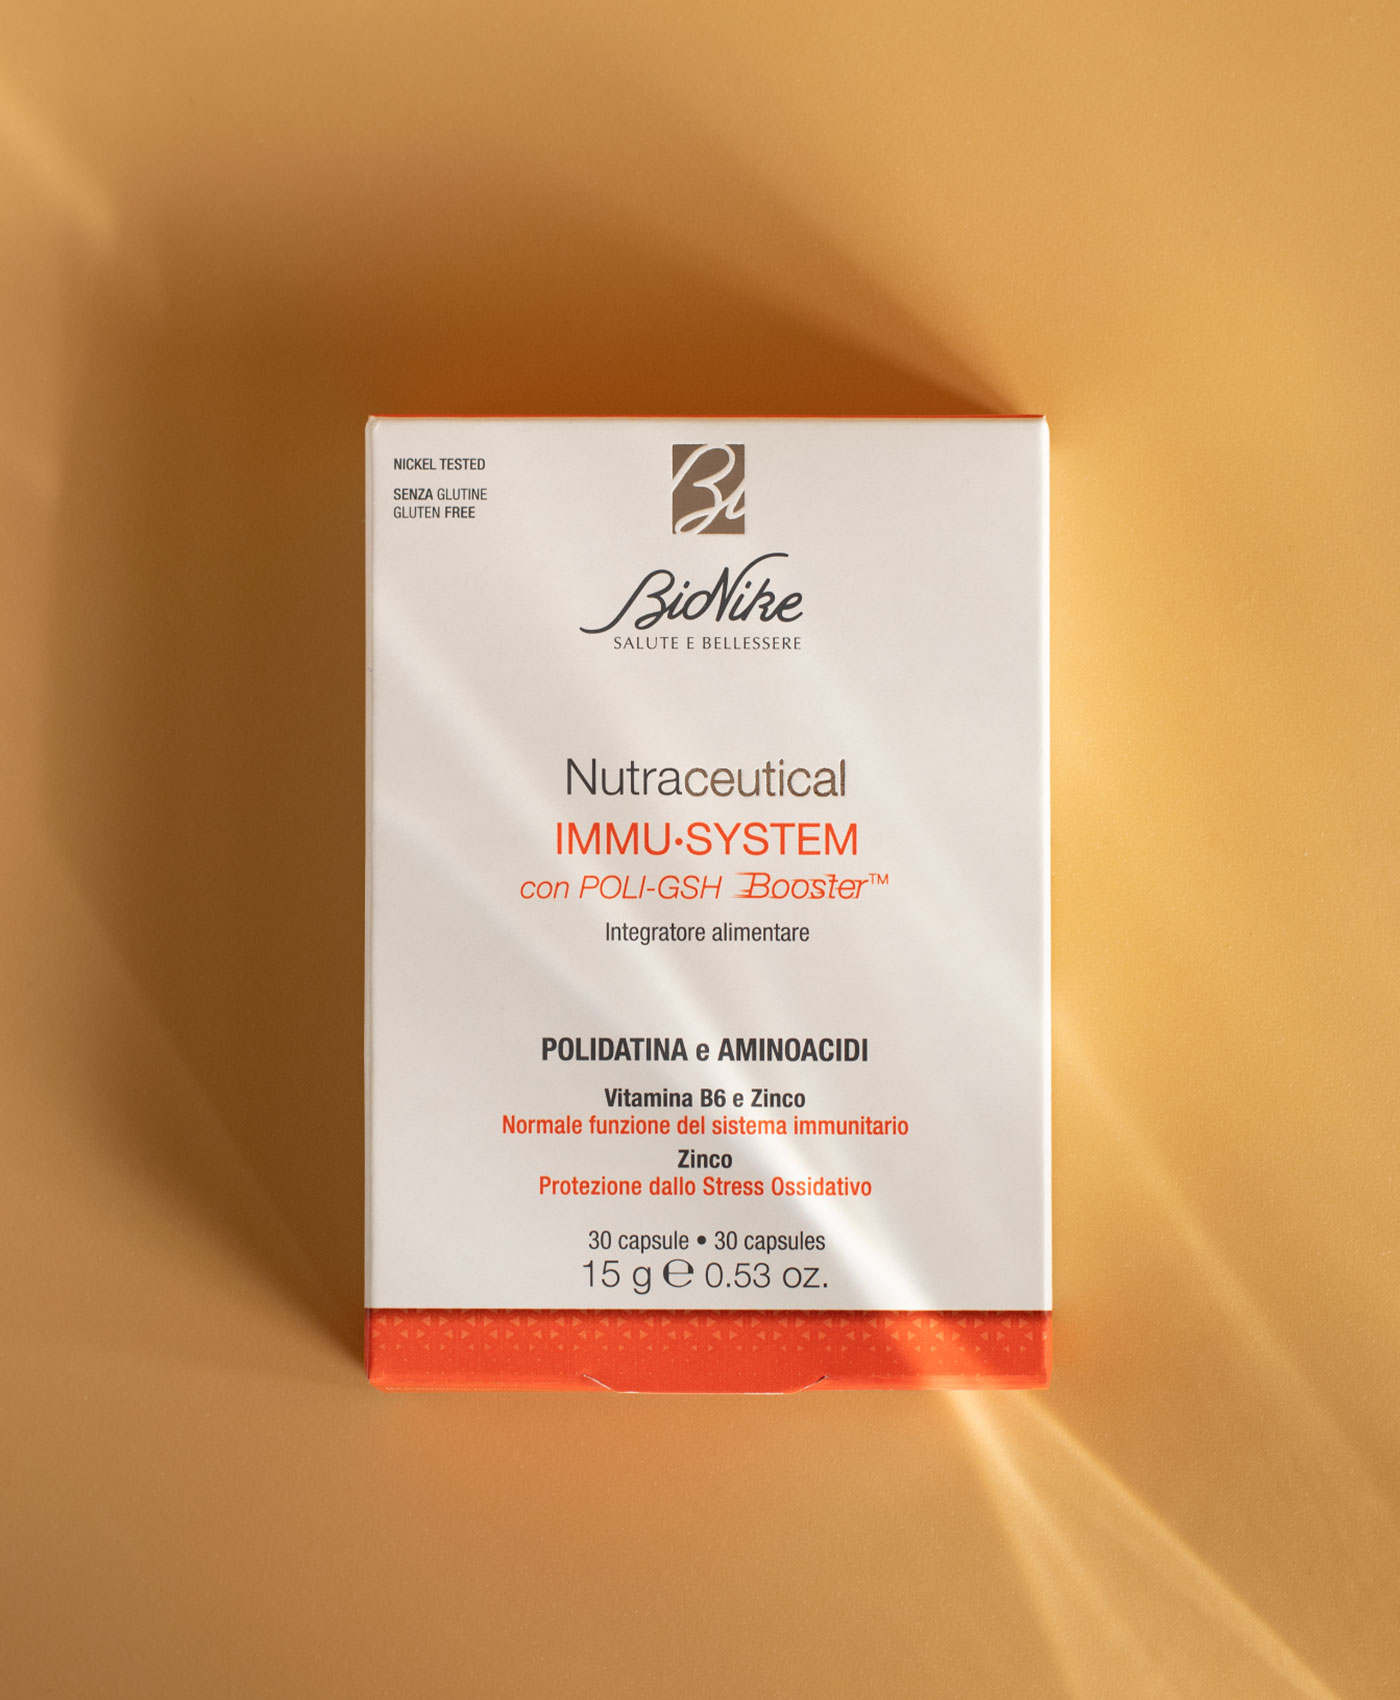 Immu-System Food Supplement - BioNike - Sito Ufficiale